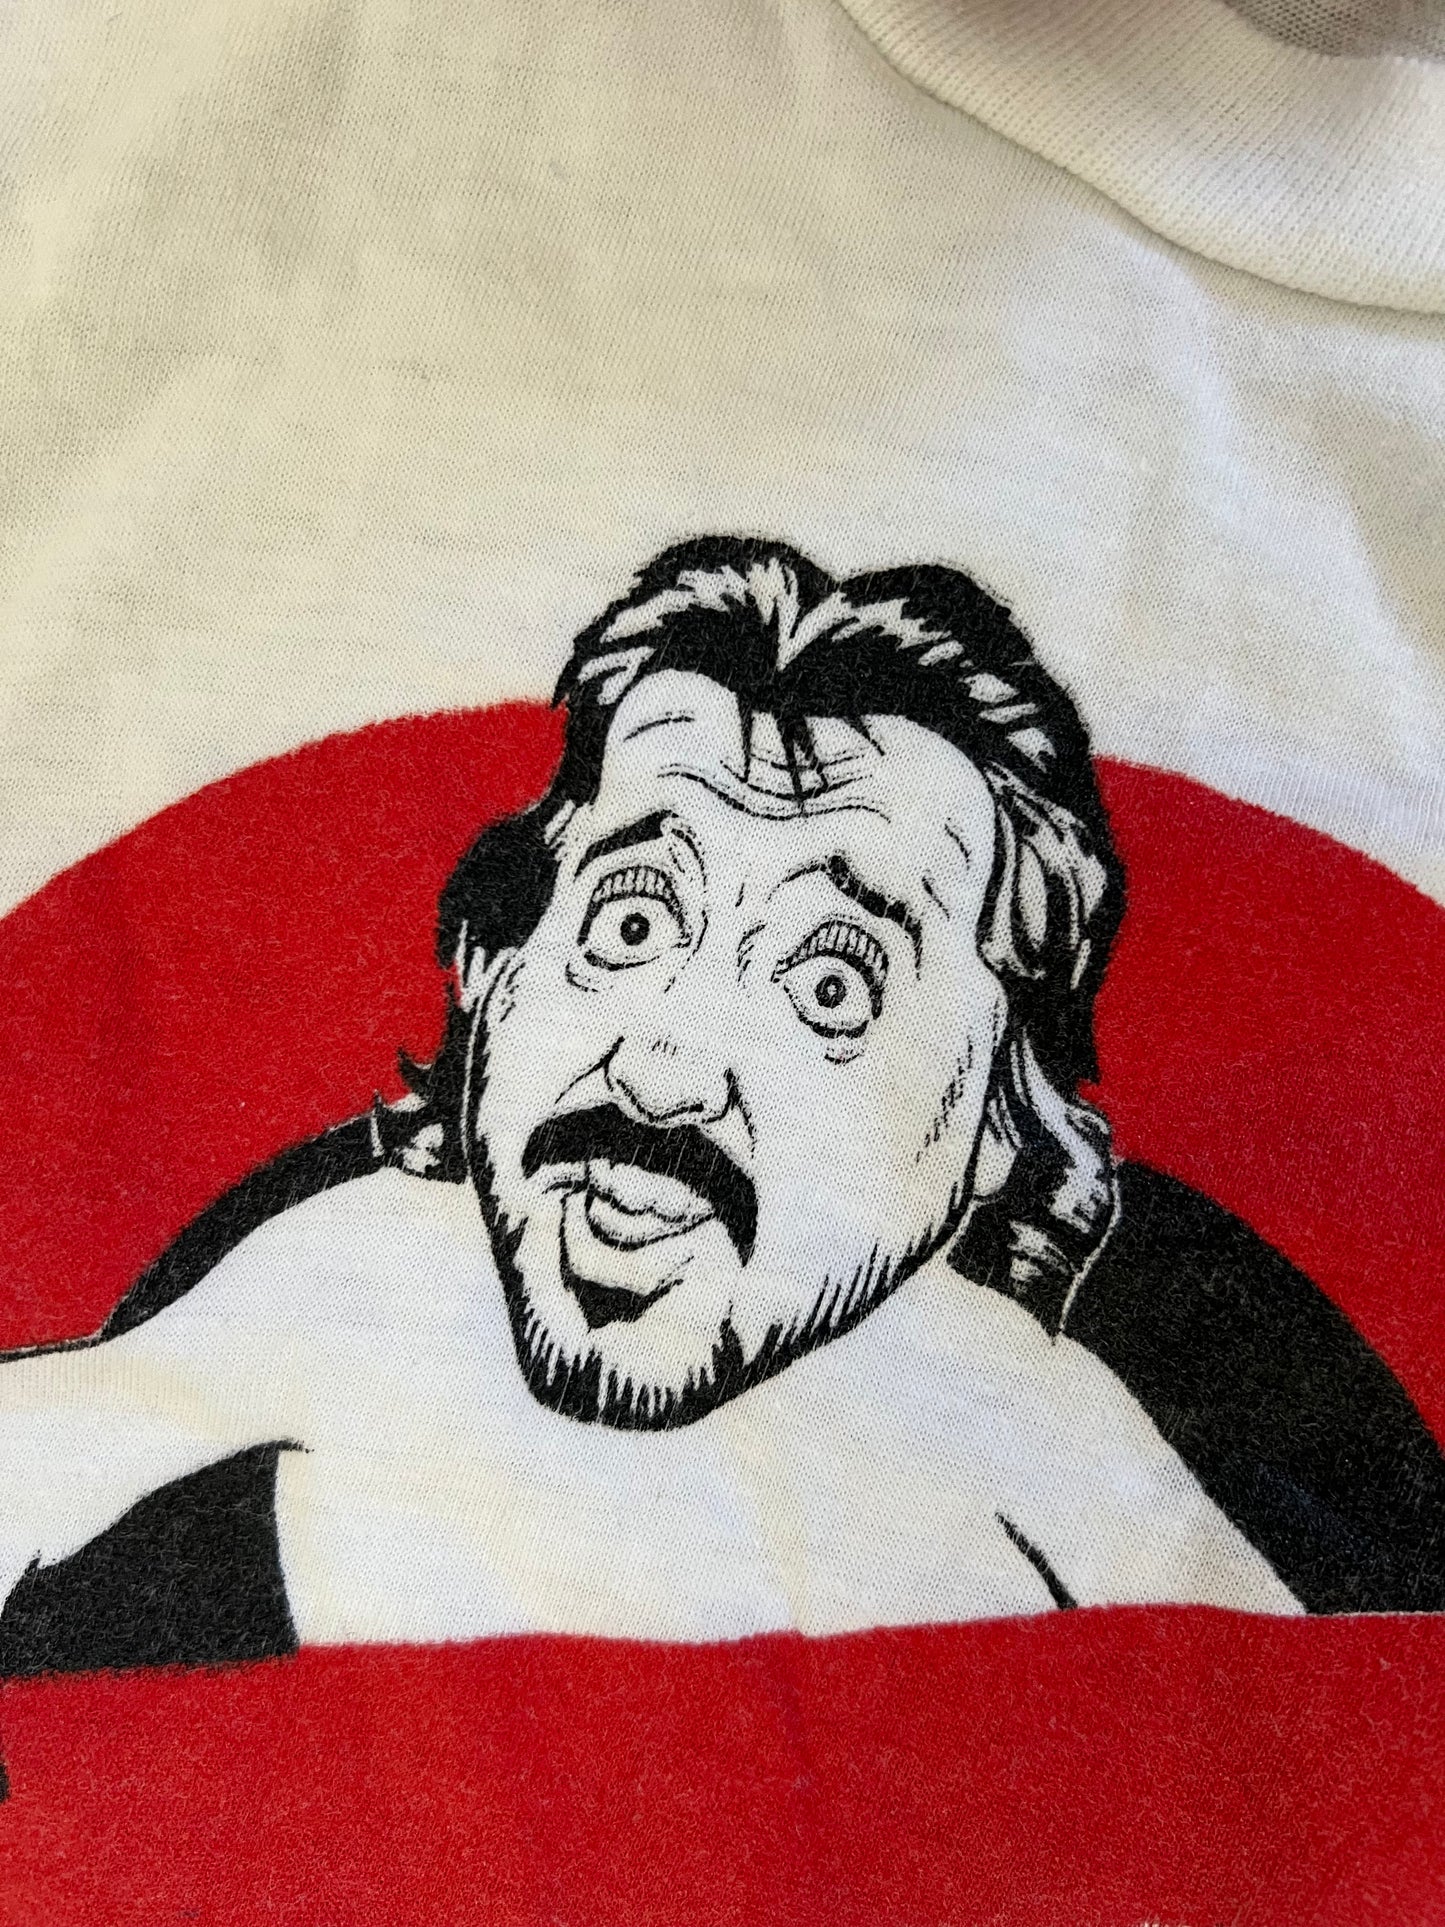 1984 CWA Mid-South Jerry “The King” Lawler “Wimpbusters” sleeveless shirt featuring “The Mouth of the South” Jimmy Hart